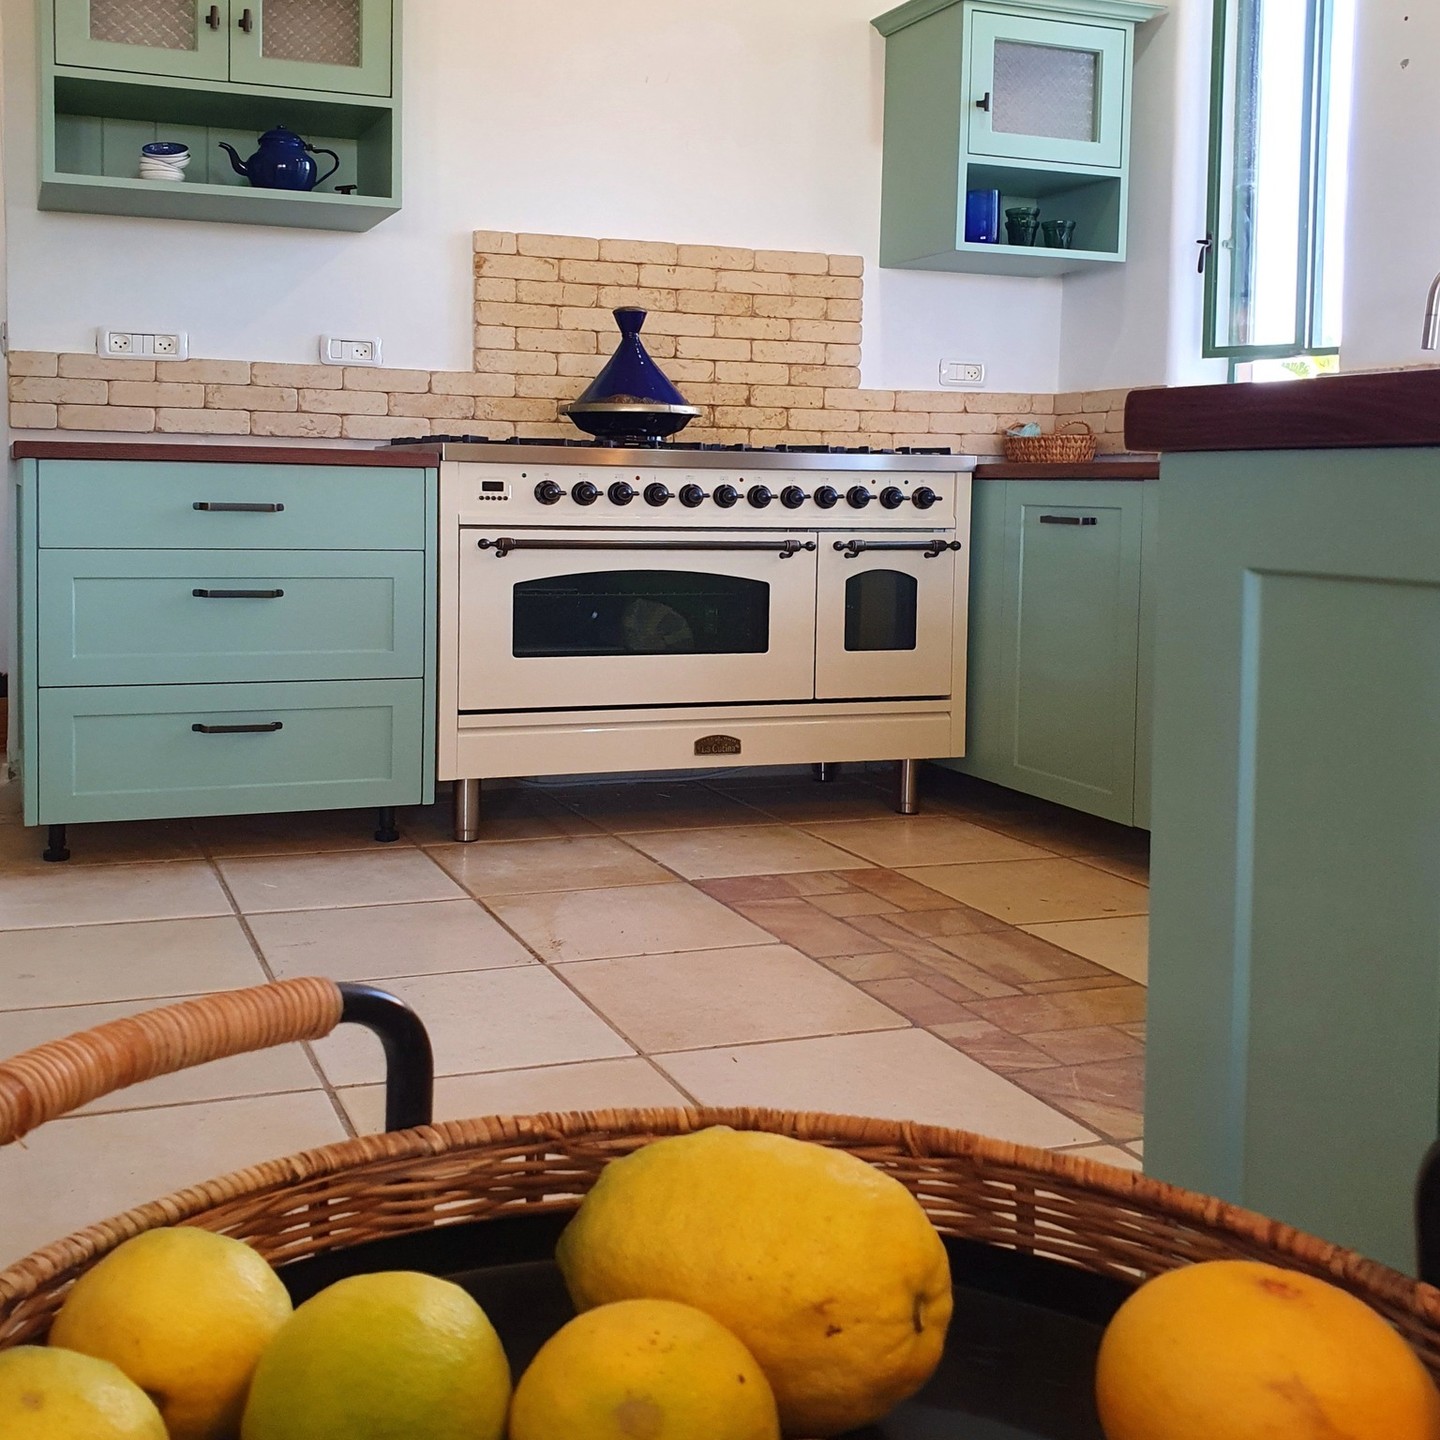 A basket of lemons decorates the turquoise kitchen cabinets.